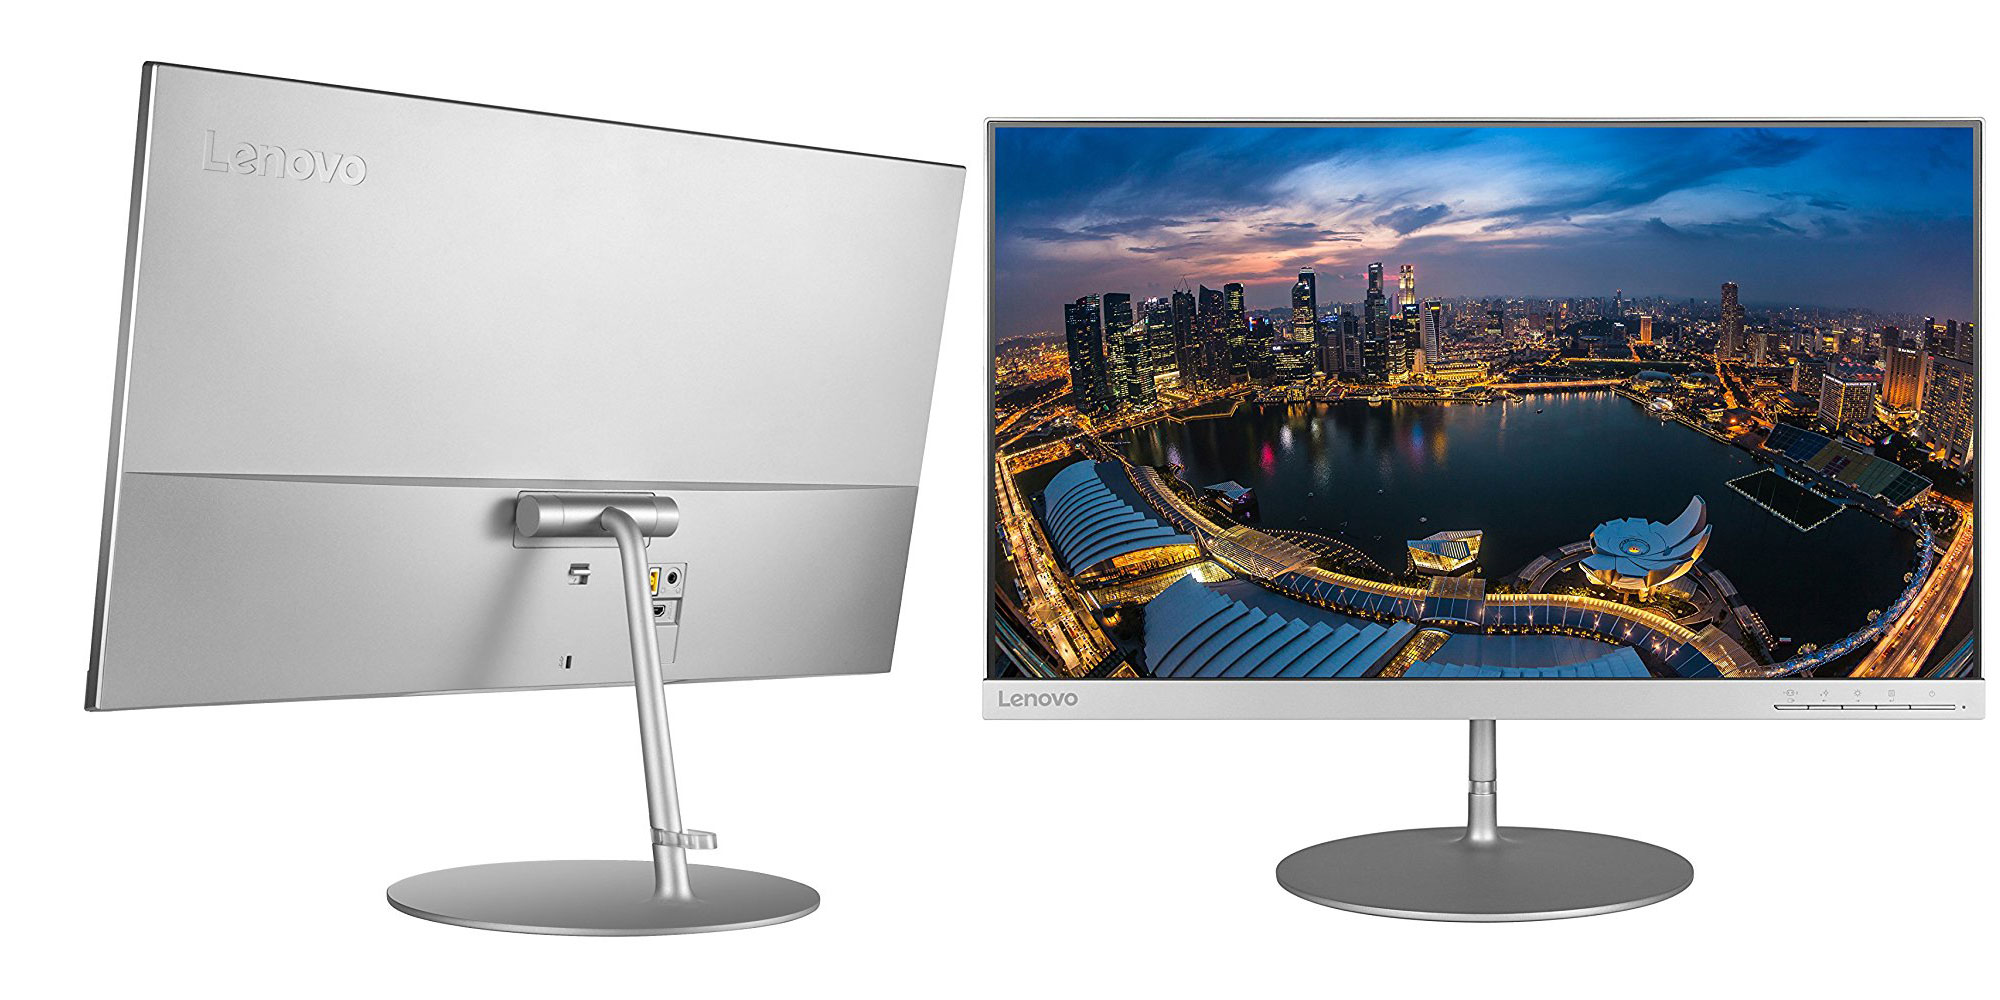 Lenovo's 24-inch 1440P monitor gives you more room to work for $150